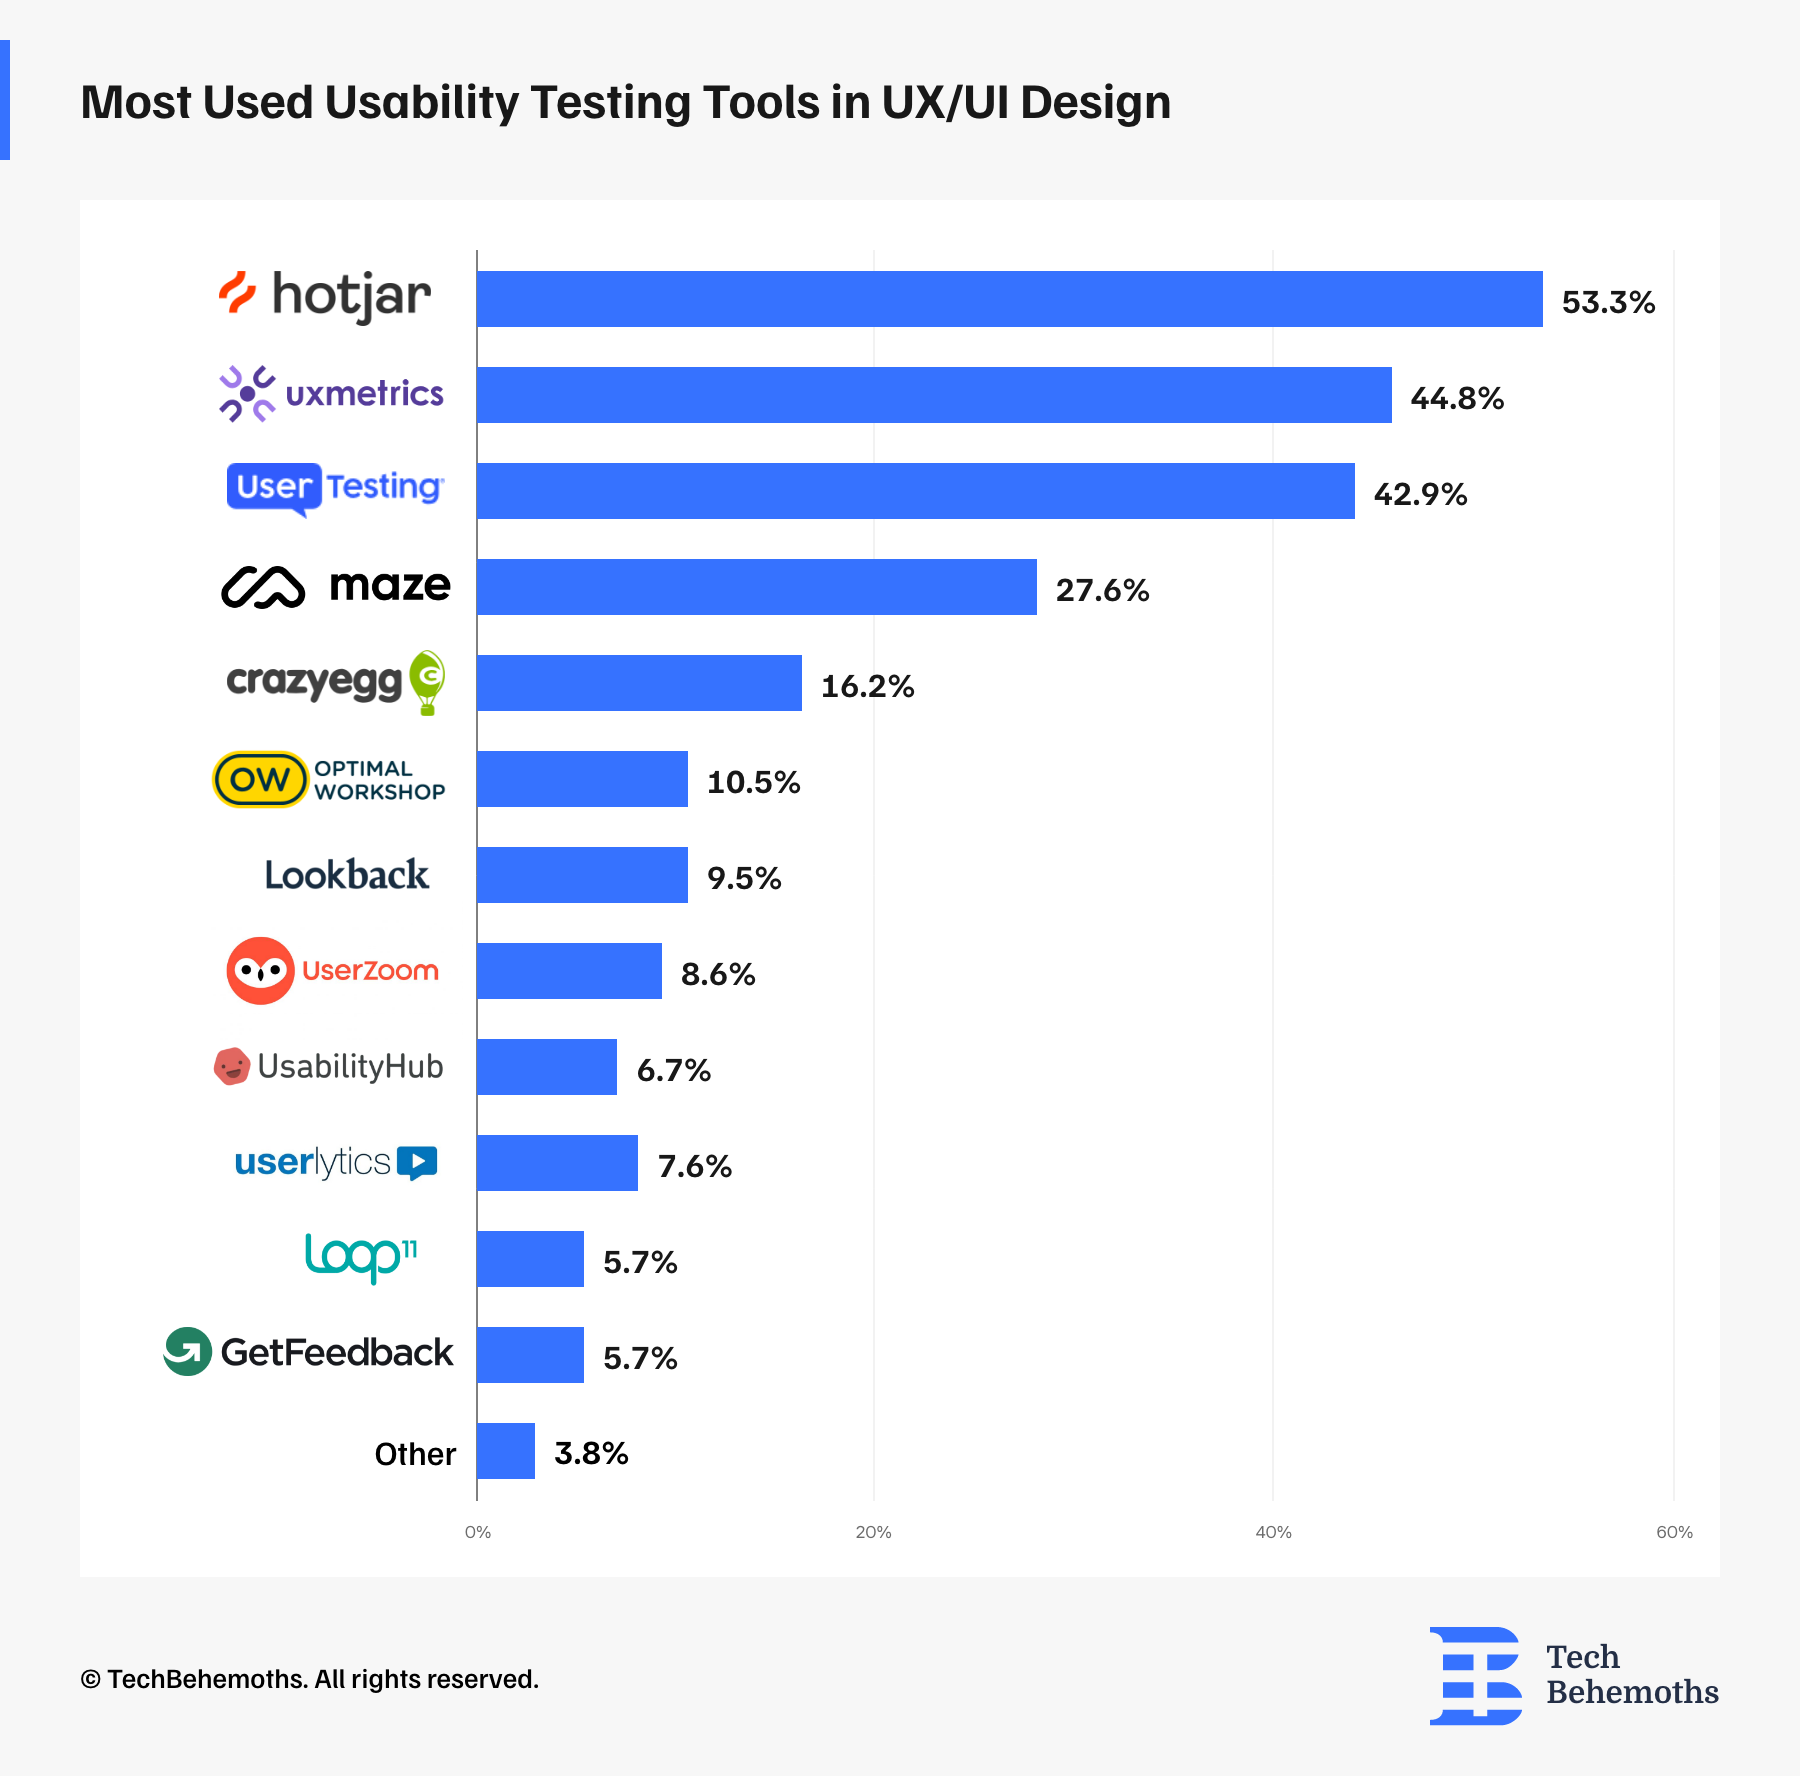 Most Used Usability Testing Tools in UX/UI Design